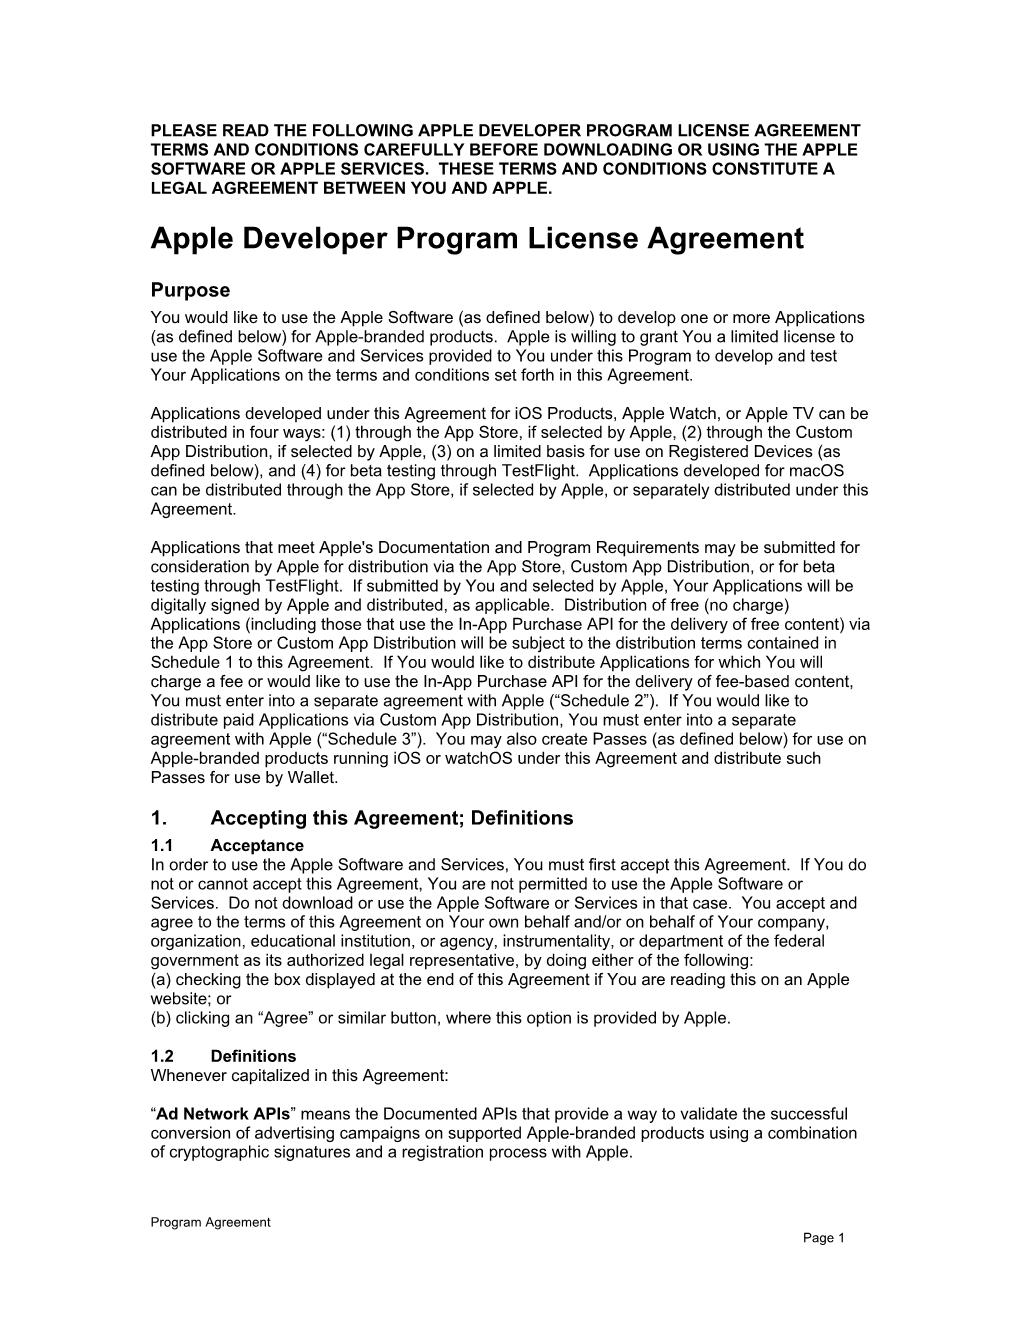 Apple Developer Program License Agreement Terms and Conditions Carefully Before Downloading Or Using the Apple Software Or Apple Services